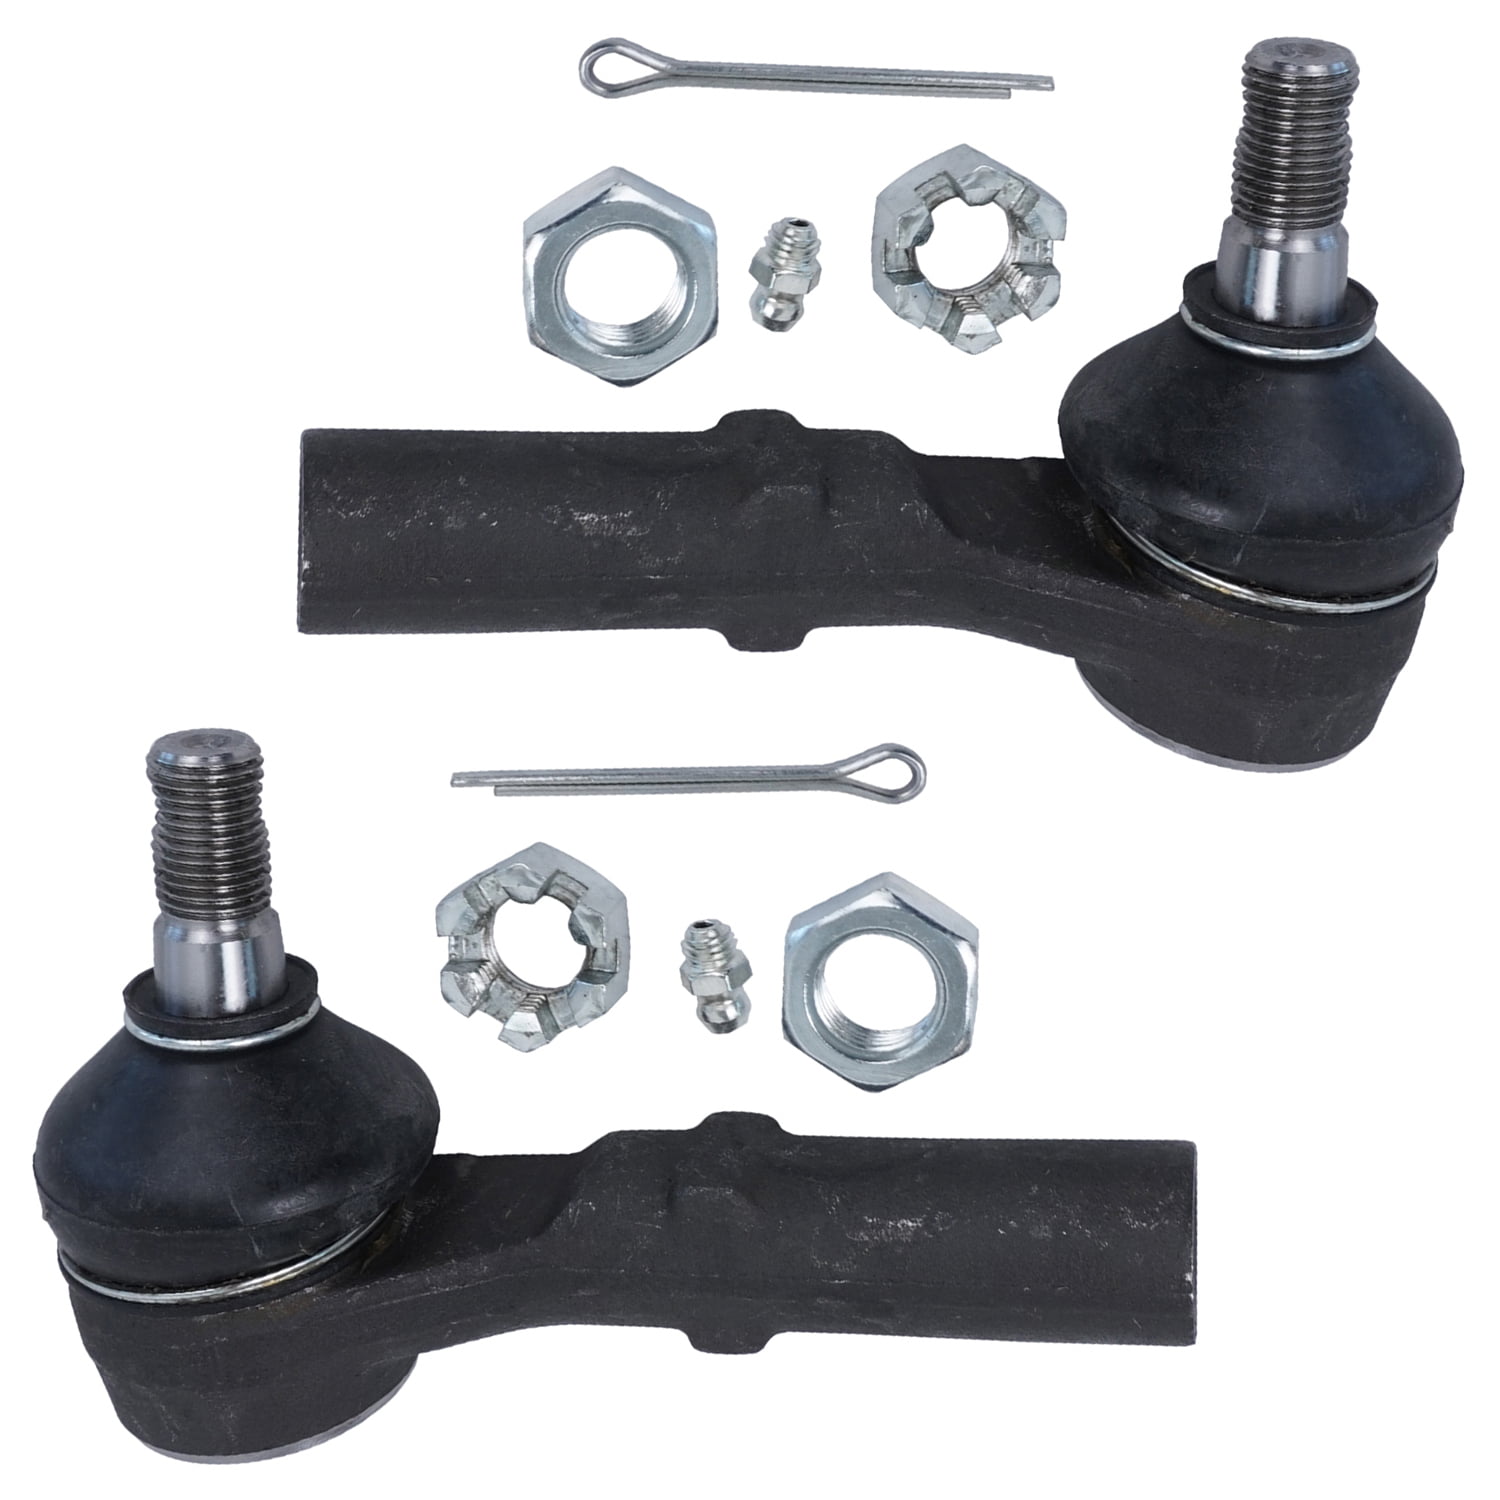 Pair 1999 Dodge Durango Detroit Axle 1997-1999 Dodge Dakota - 2 Front Outer Tie Rod Ends fits Left and Right Side 2WD Models ONLY 